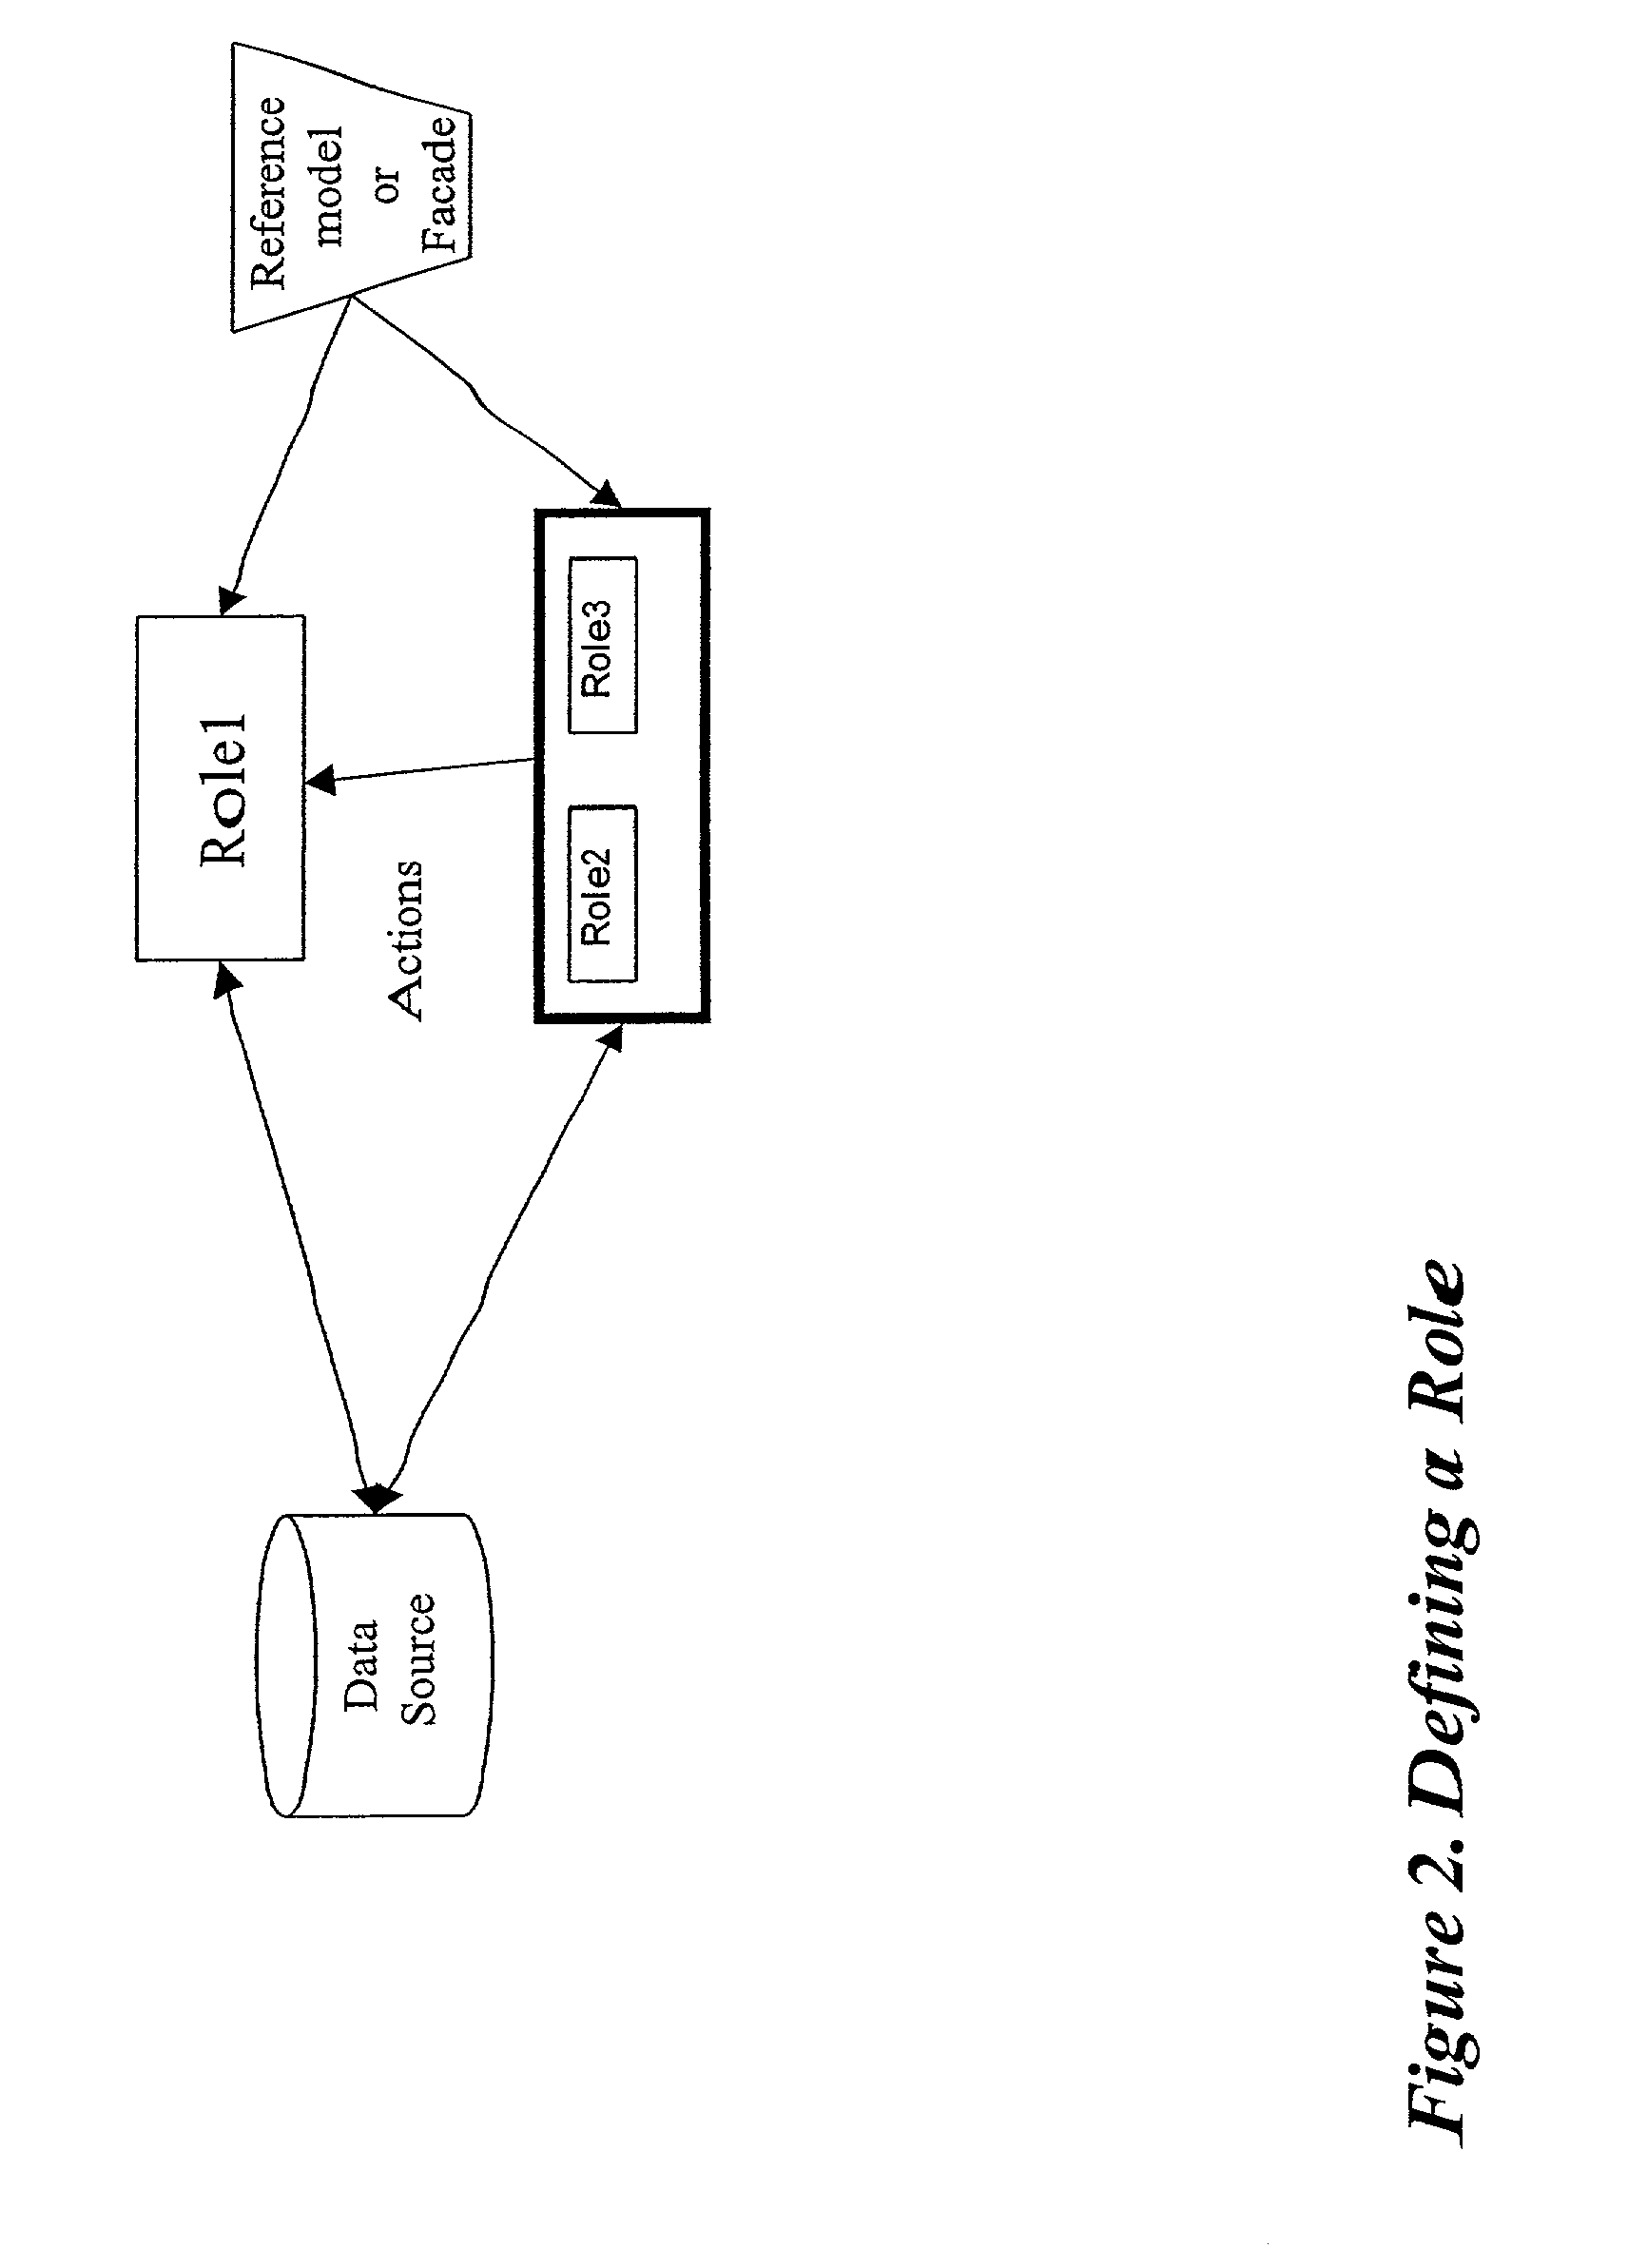 Method and apparatus for implementing an active information model